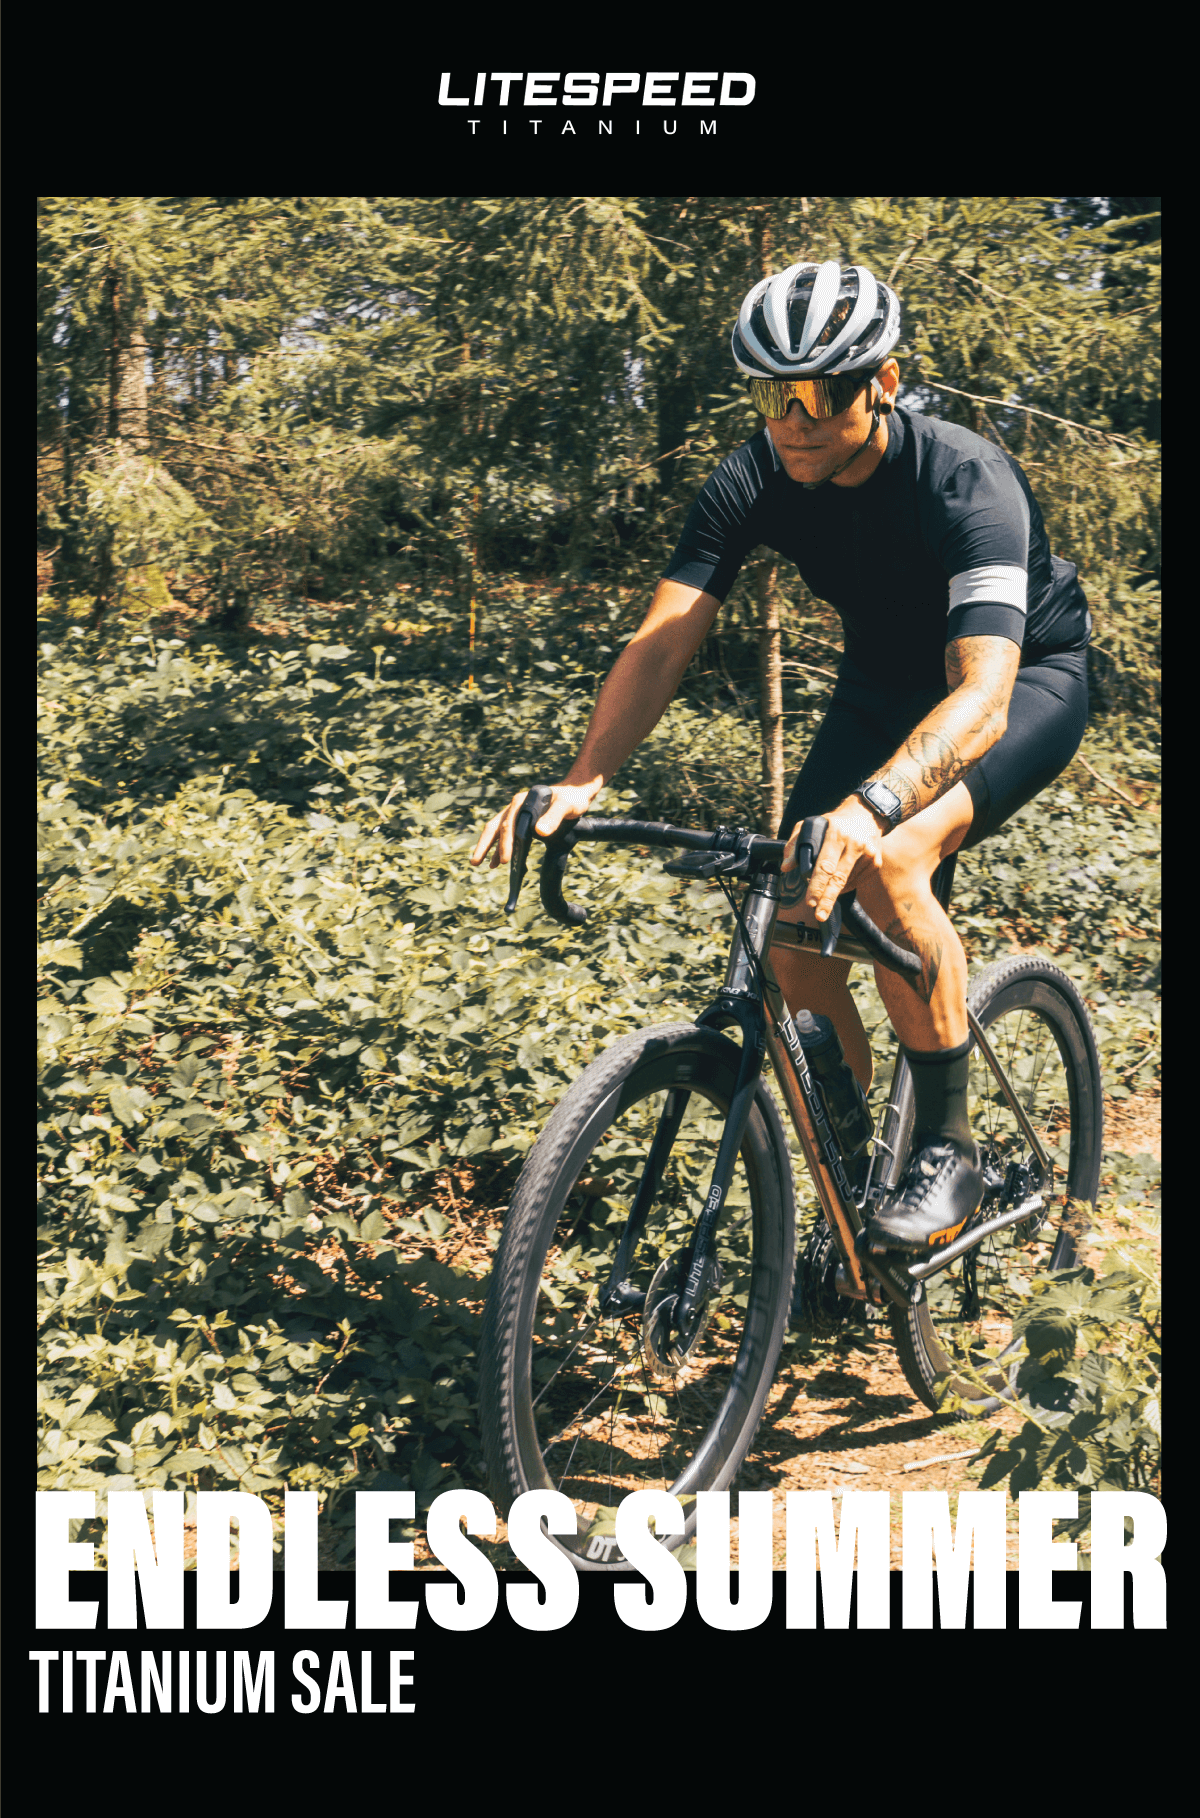 The Litespeed Endless Summer Sale goes on. Shop made-in-the-USA titanium bikes on sale now.